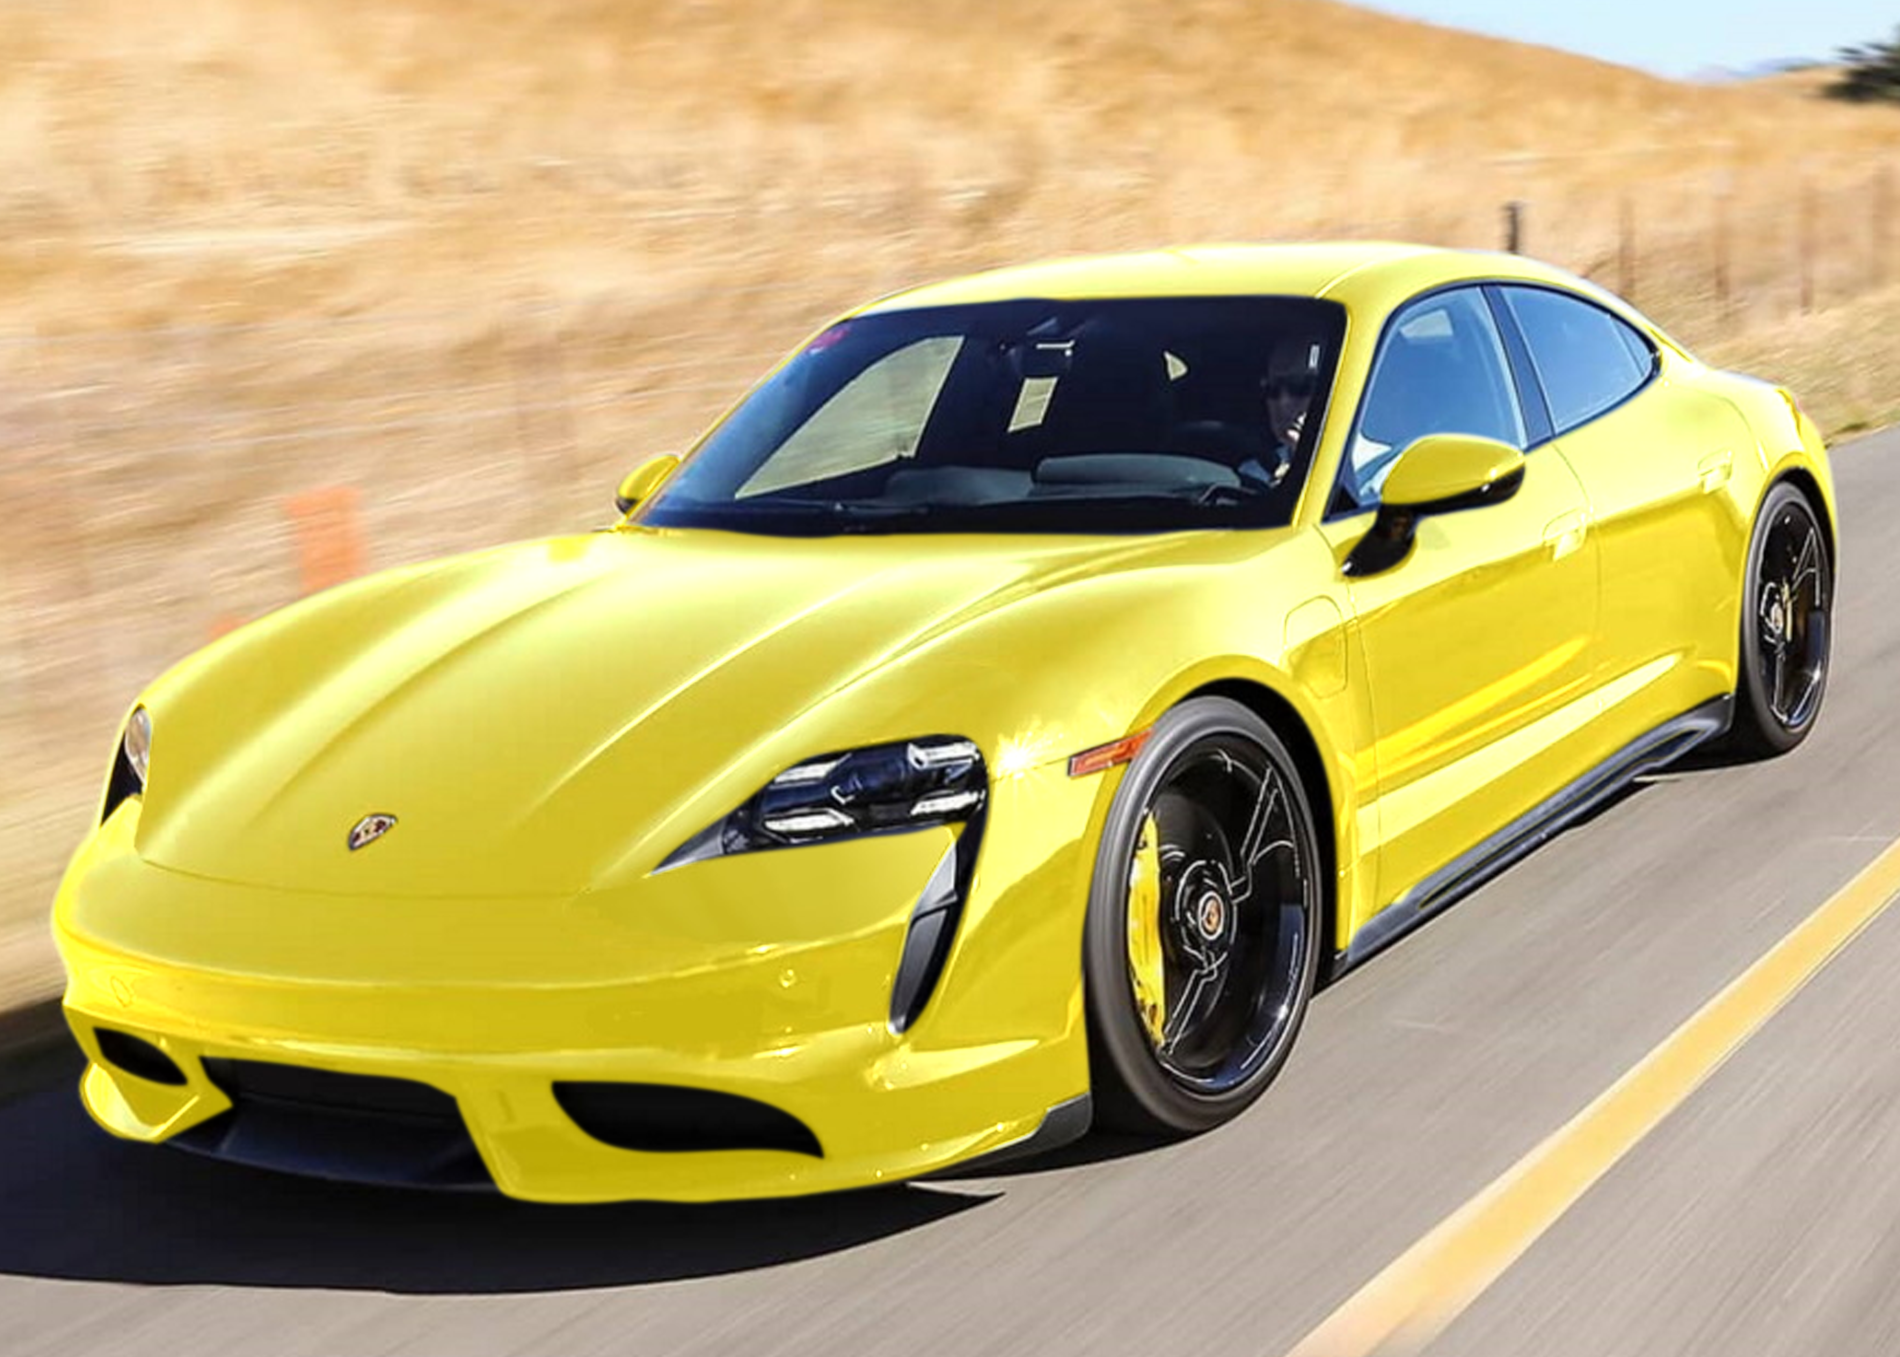 Porsche Taycan Possible Taycan color options........... Tay yellow